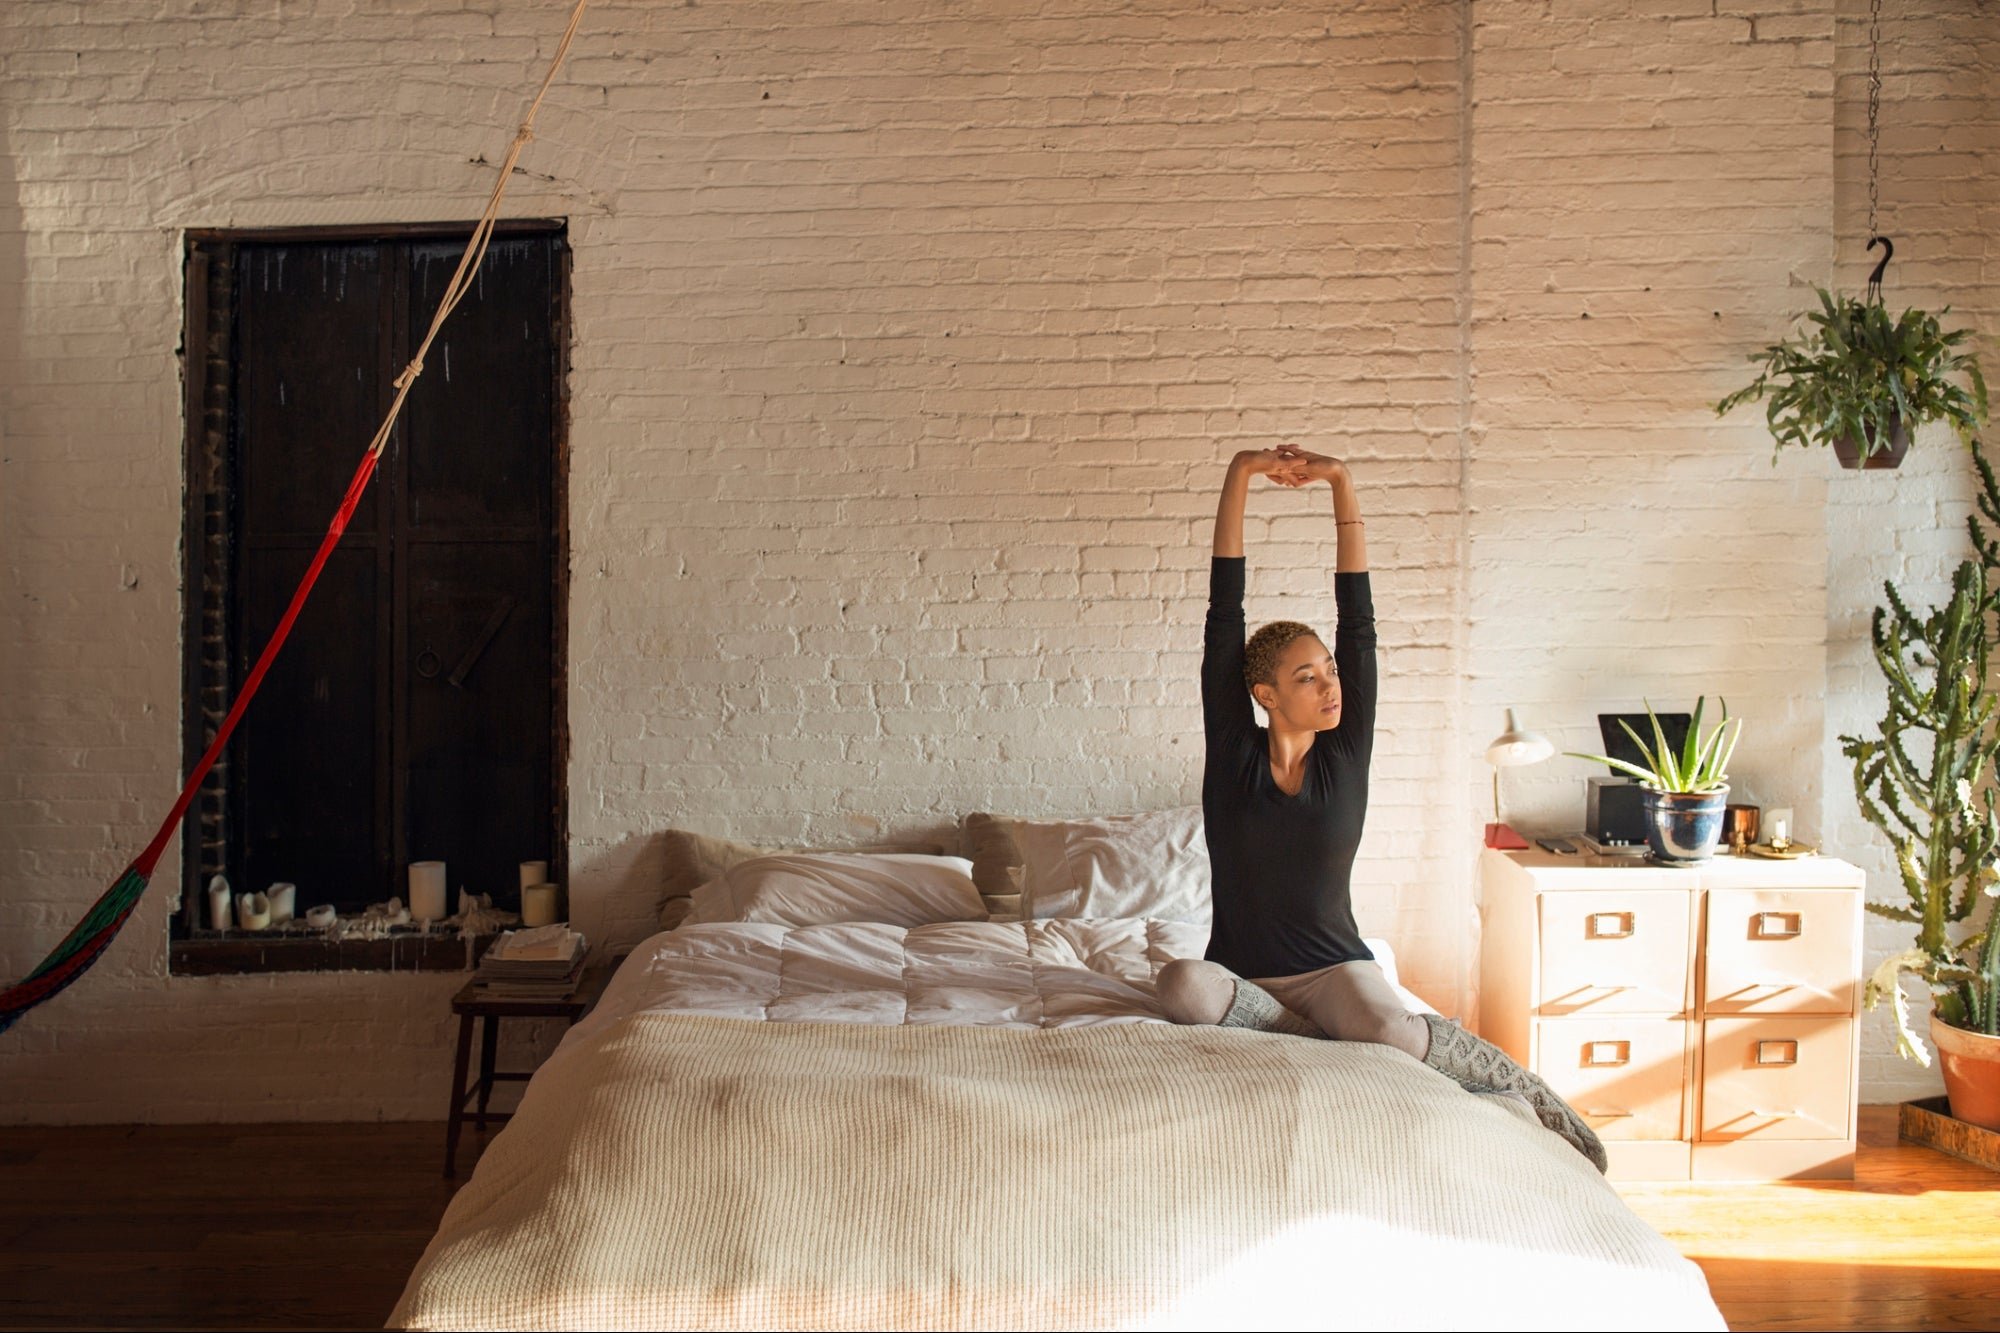 5 Morning Habits That Will Start Your Day With Purpose